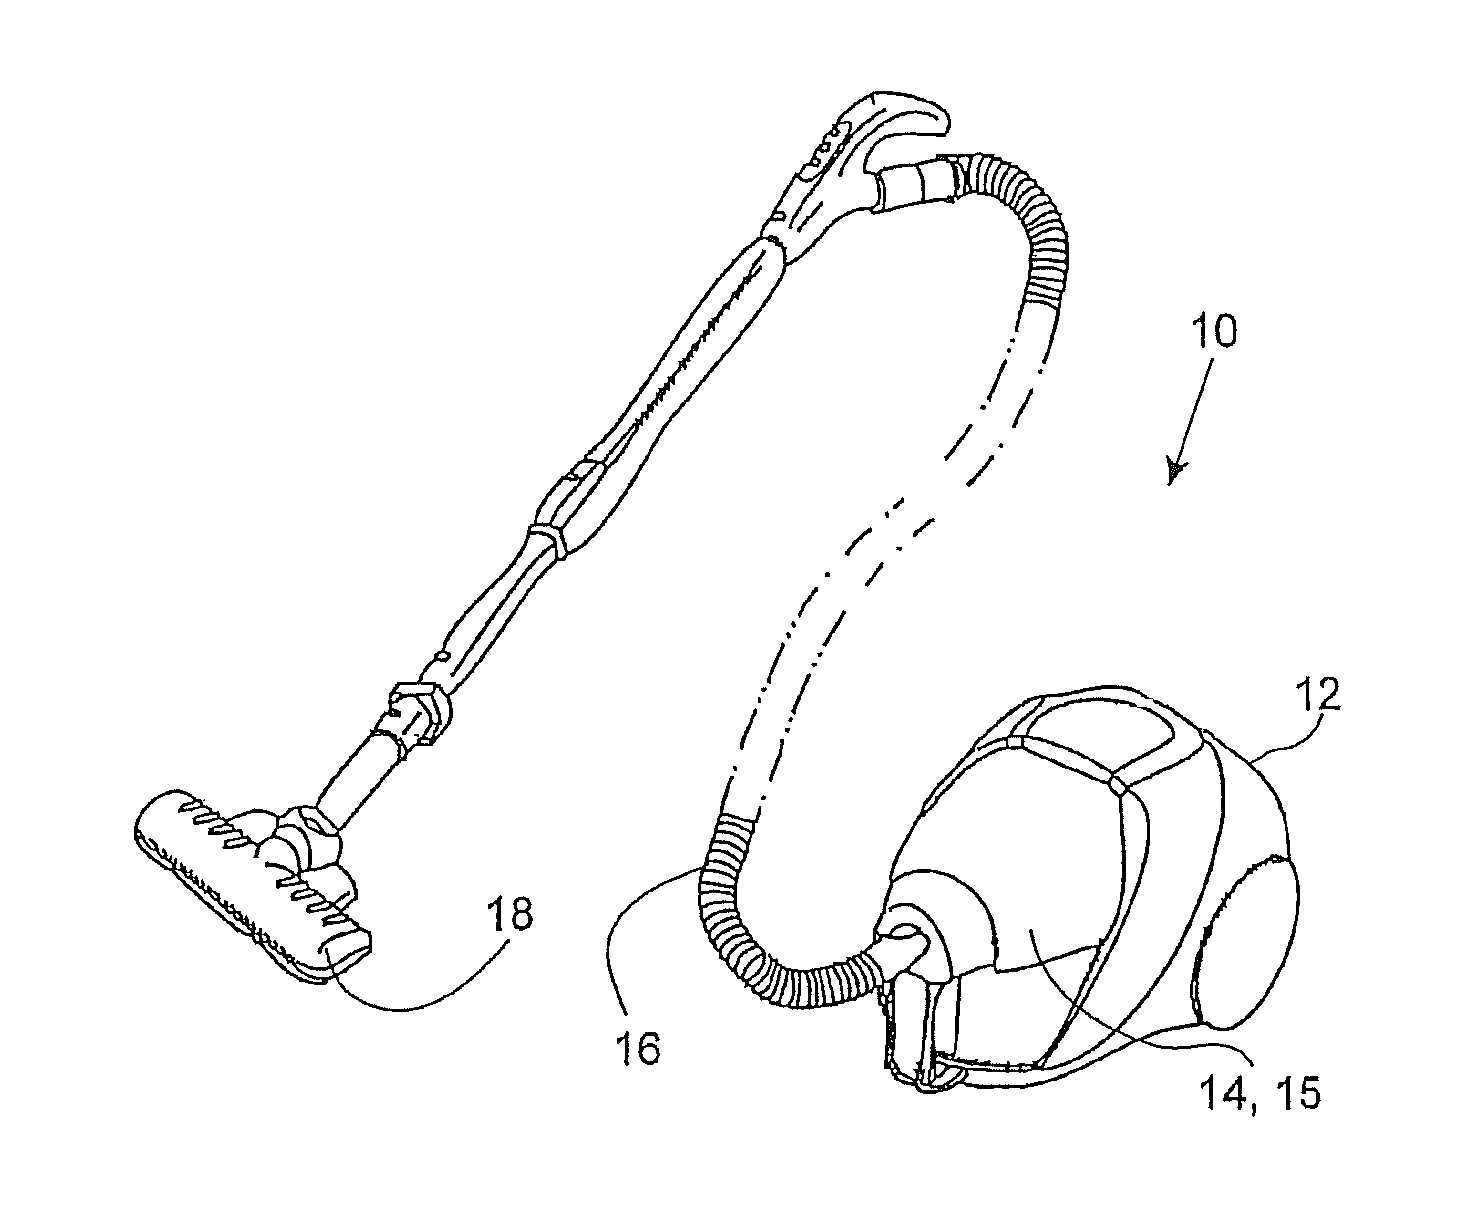 Air volume flow and pushing force control device